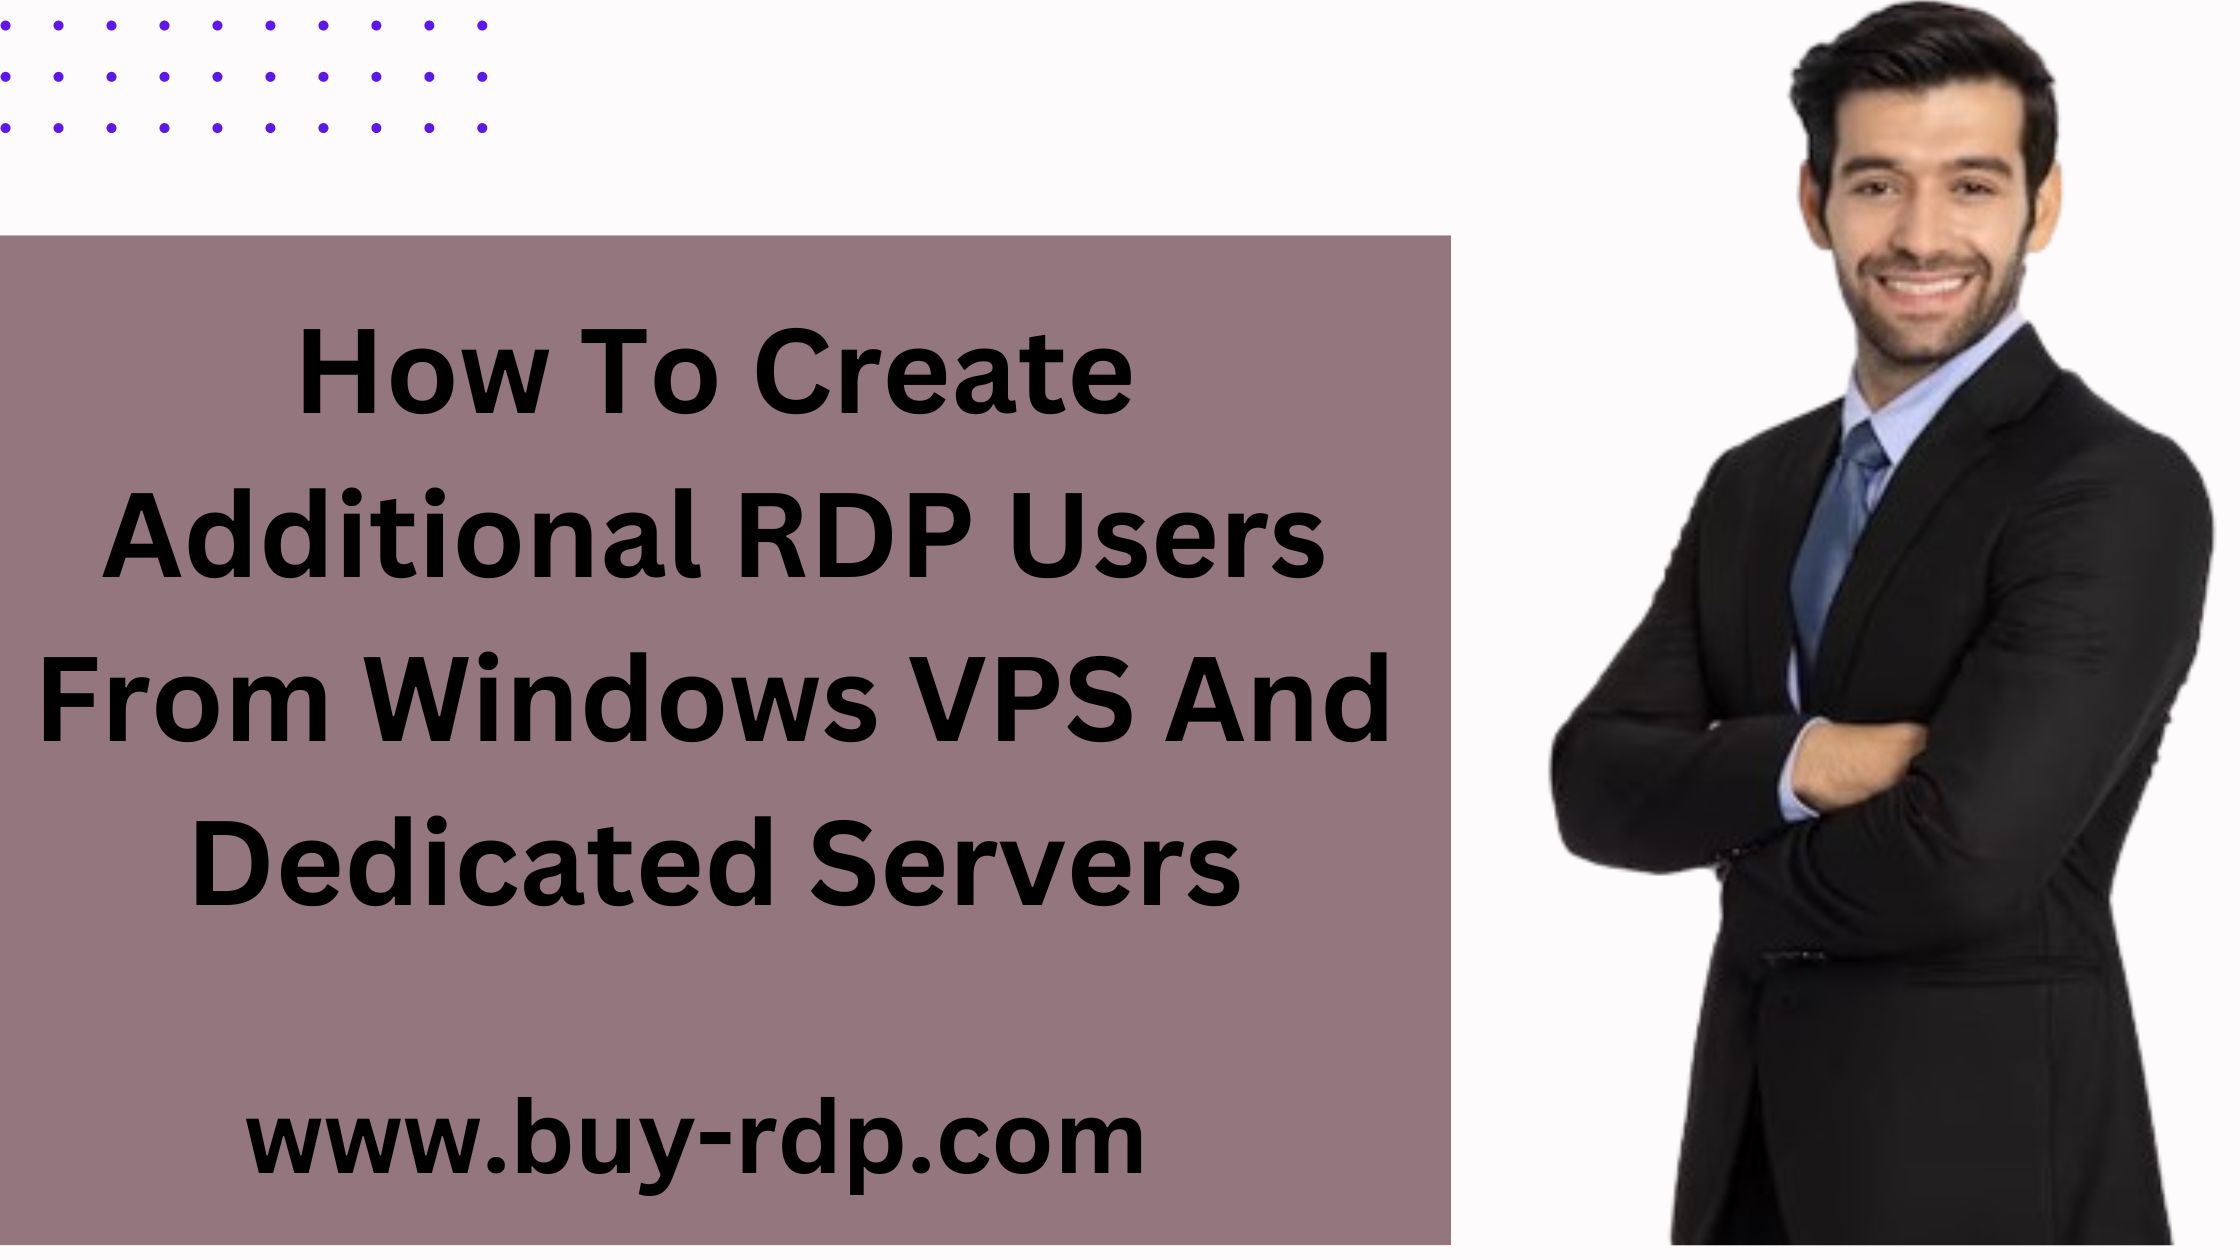 How To Create Additional RDP Users From Windows VPS And Dedicated Servers